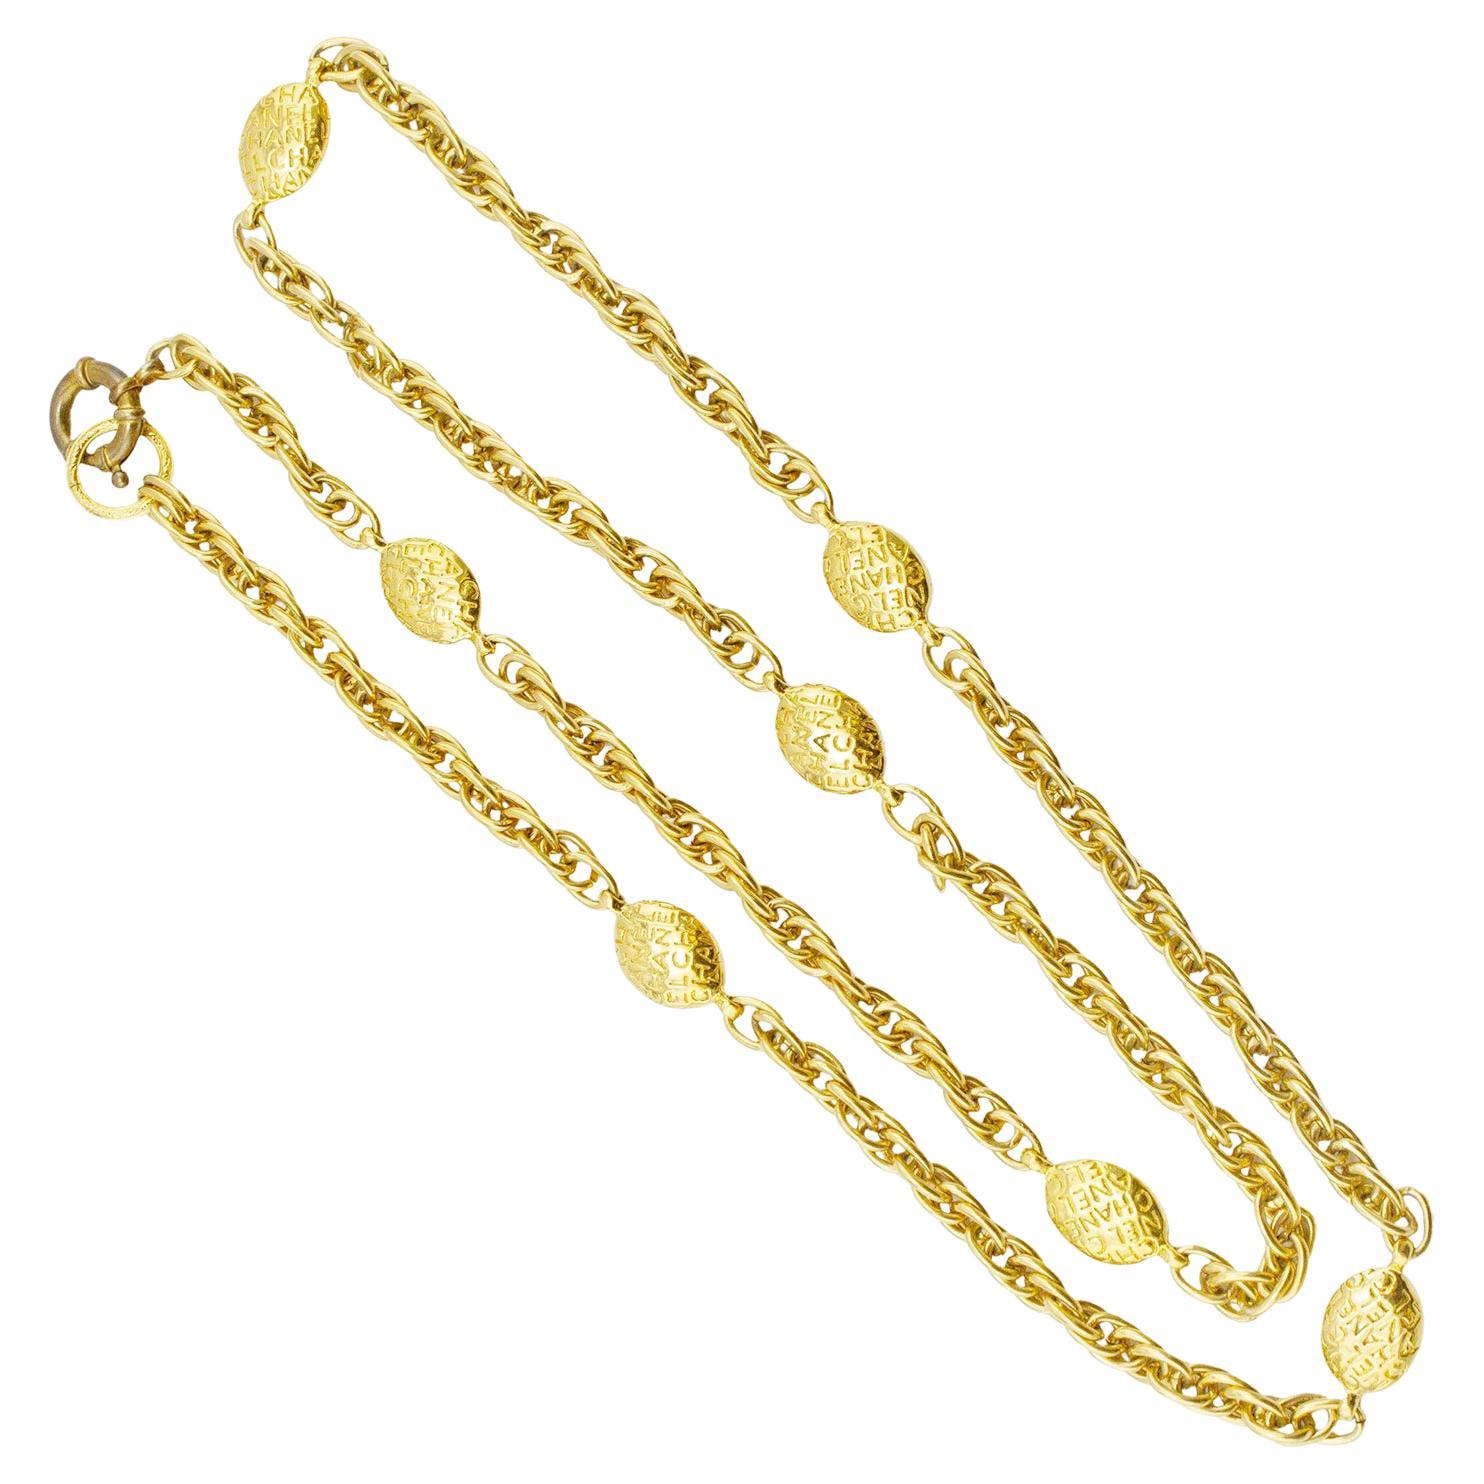 1980s Chanel Single Chain Necklace with Oval Engraved Links  For Sale